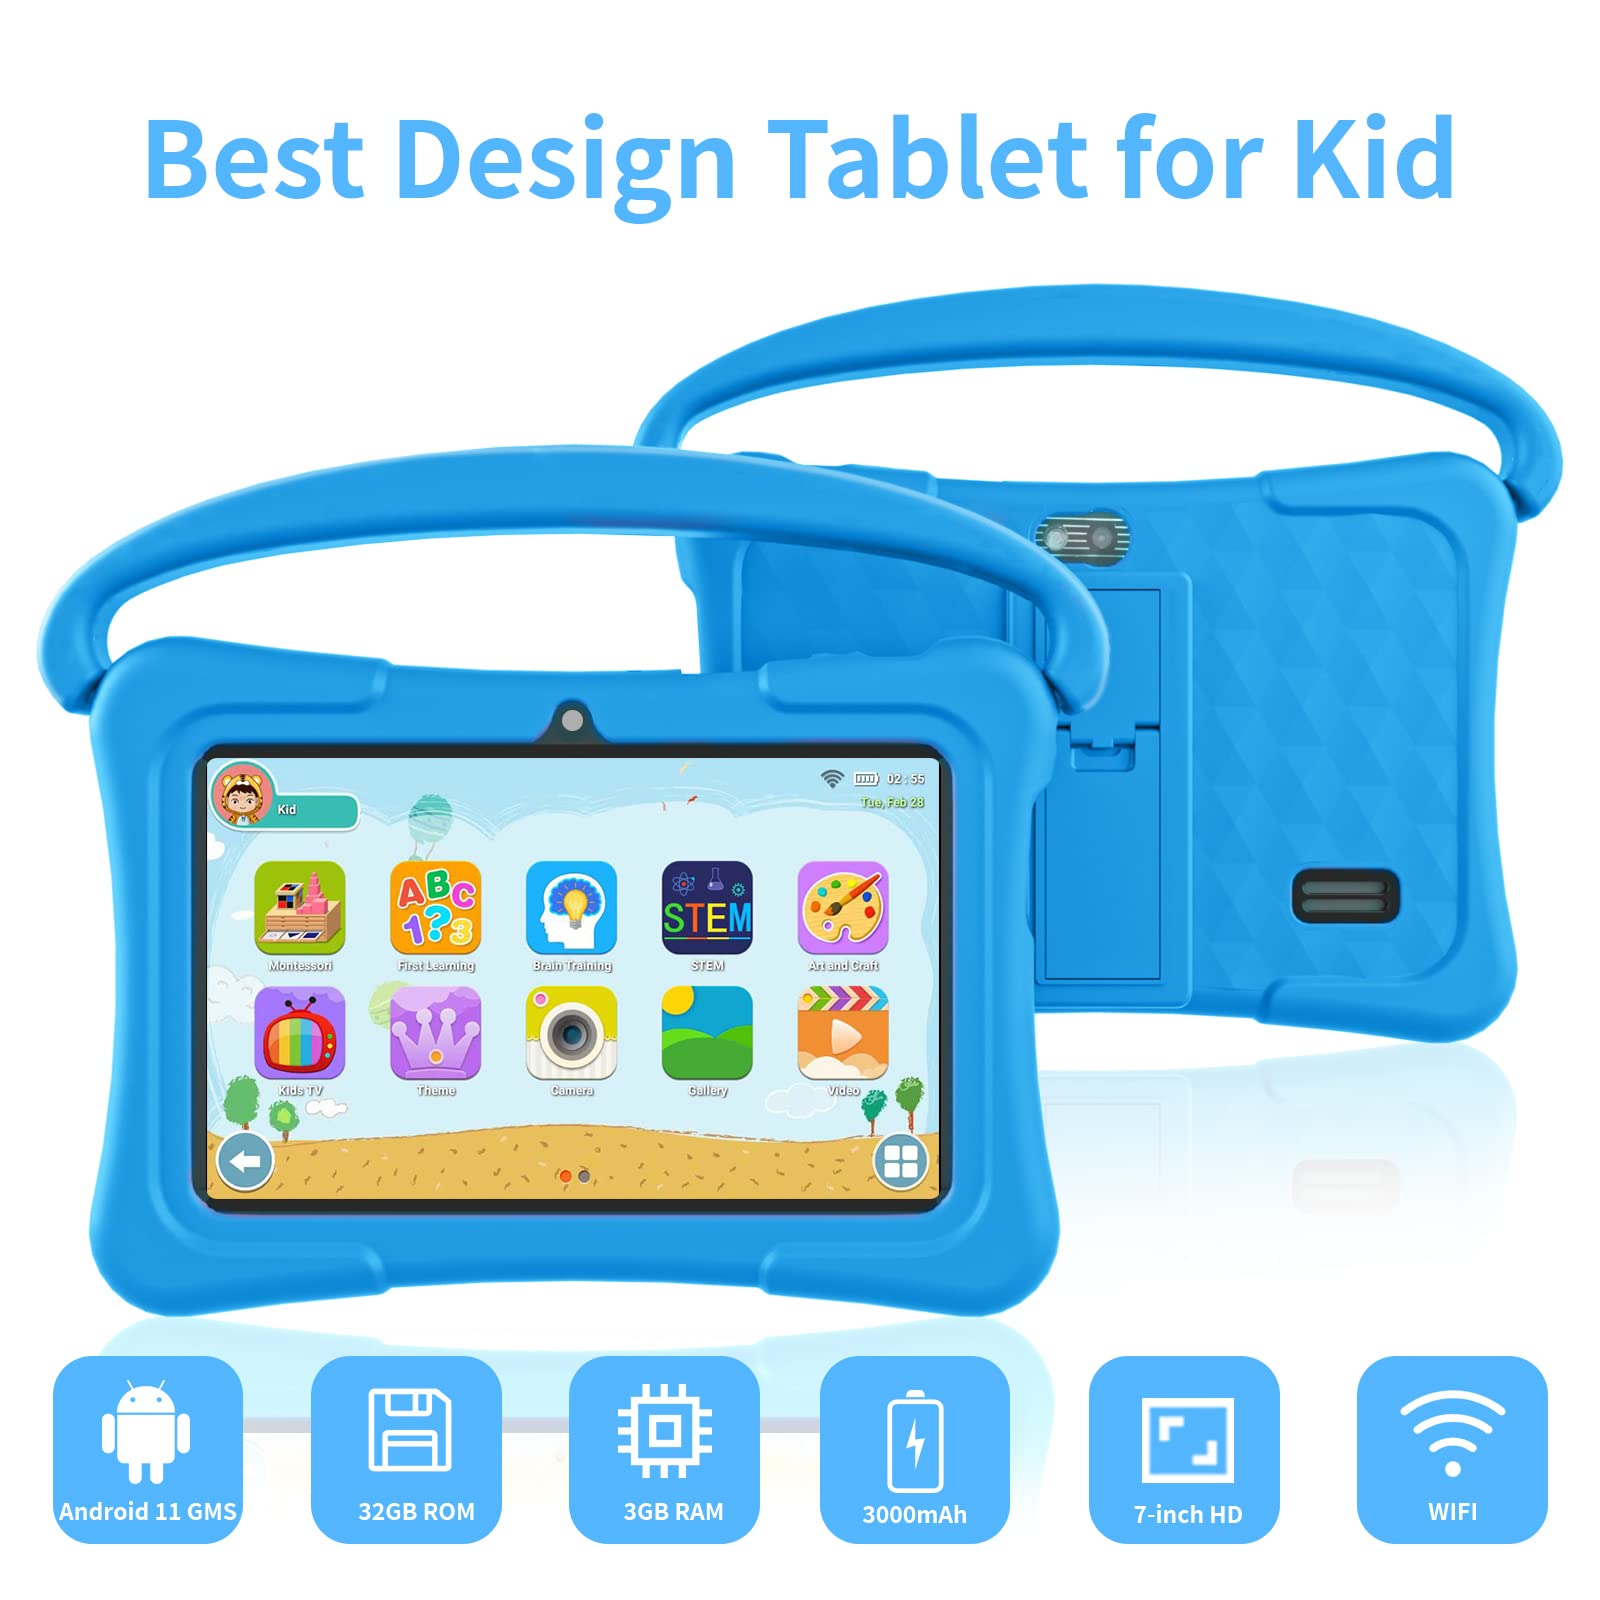 WXUNJA Kids Tablet, 7 inch Android Tablet for Kids, 3GB 32GB Toddler Tablet with Bluetooth, GMS, WiFi, Parental Control, Dual Camera, Shockproof Case, Educational, Games (Blue)